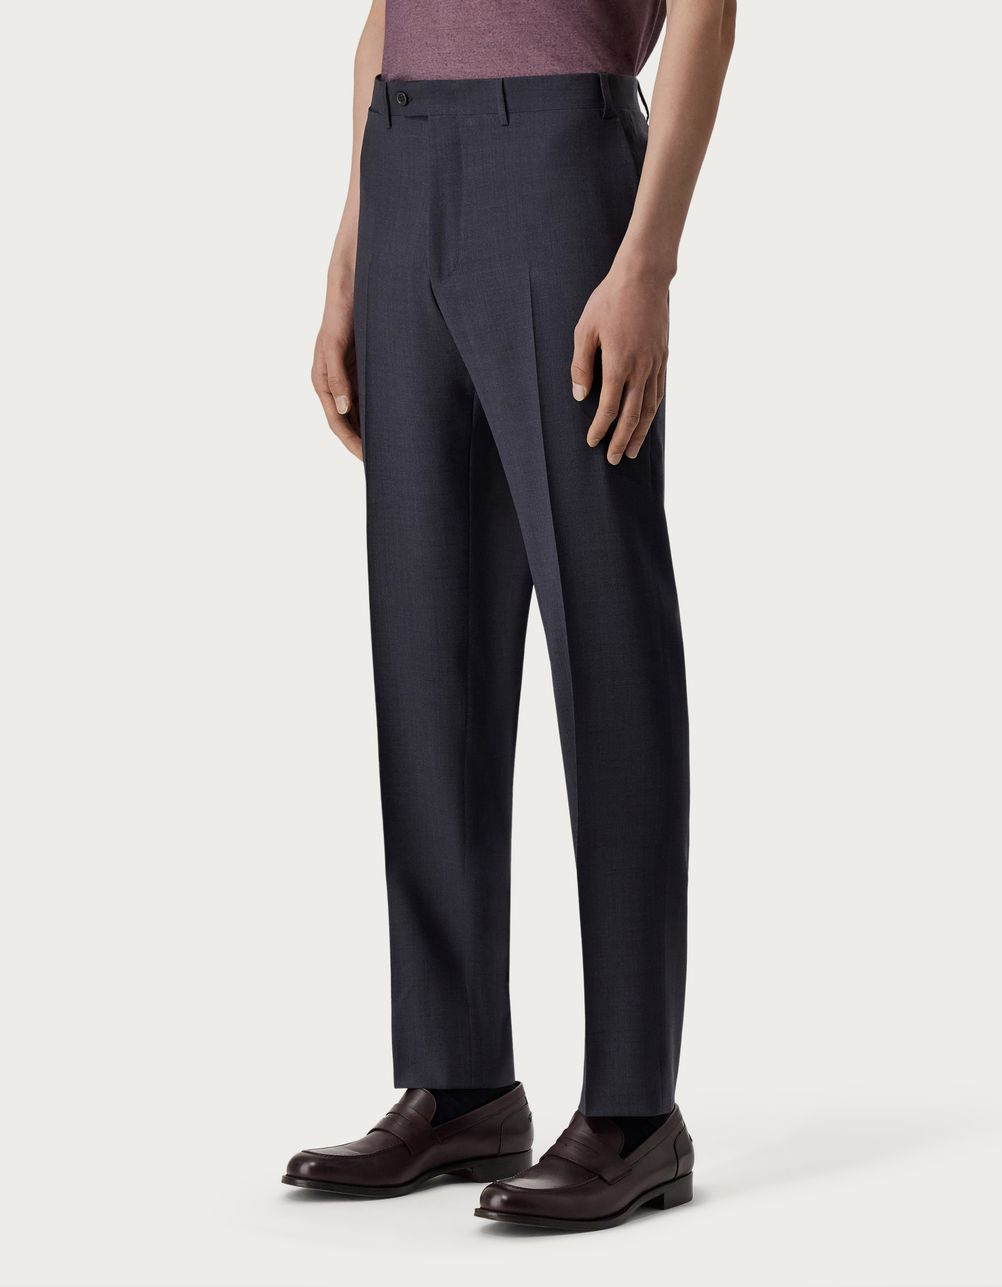 Impeccabile wool pants in grey